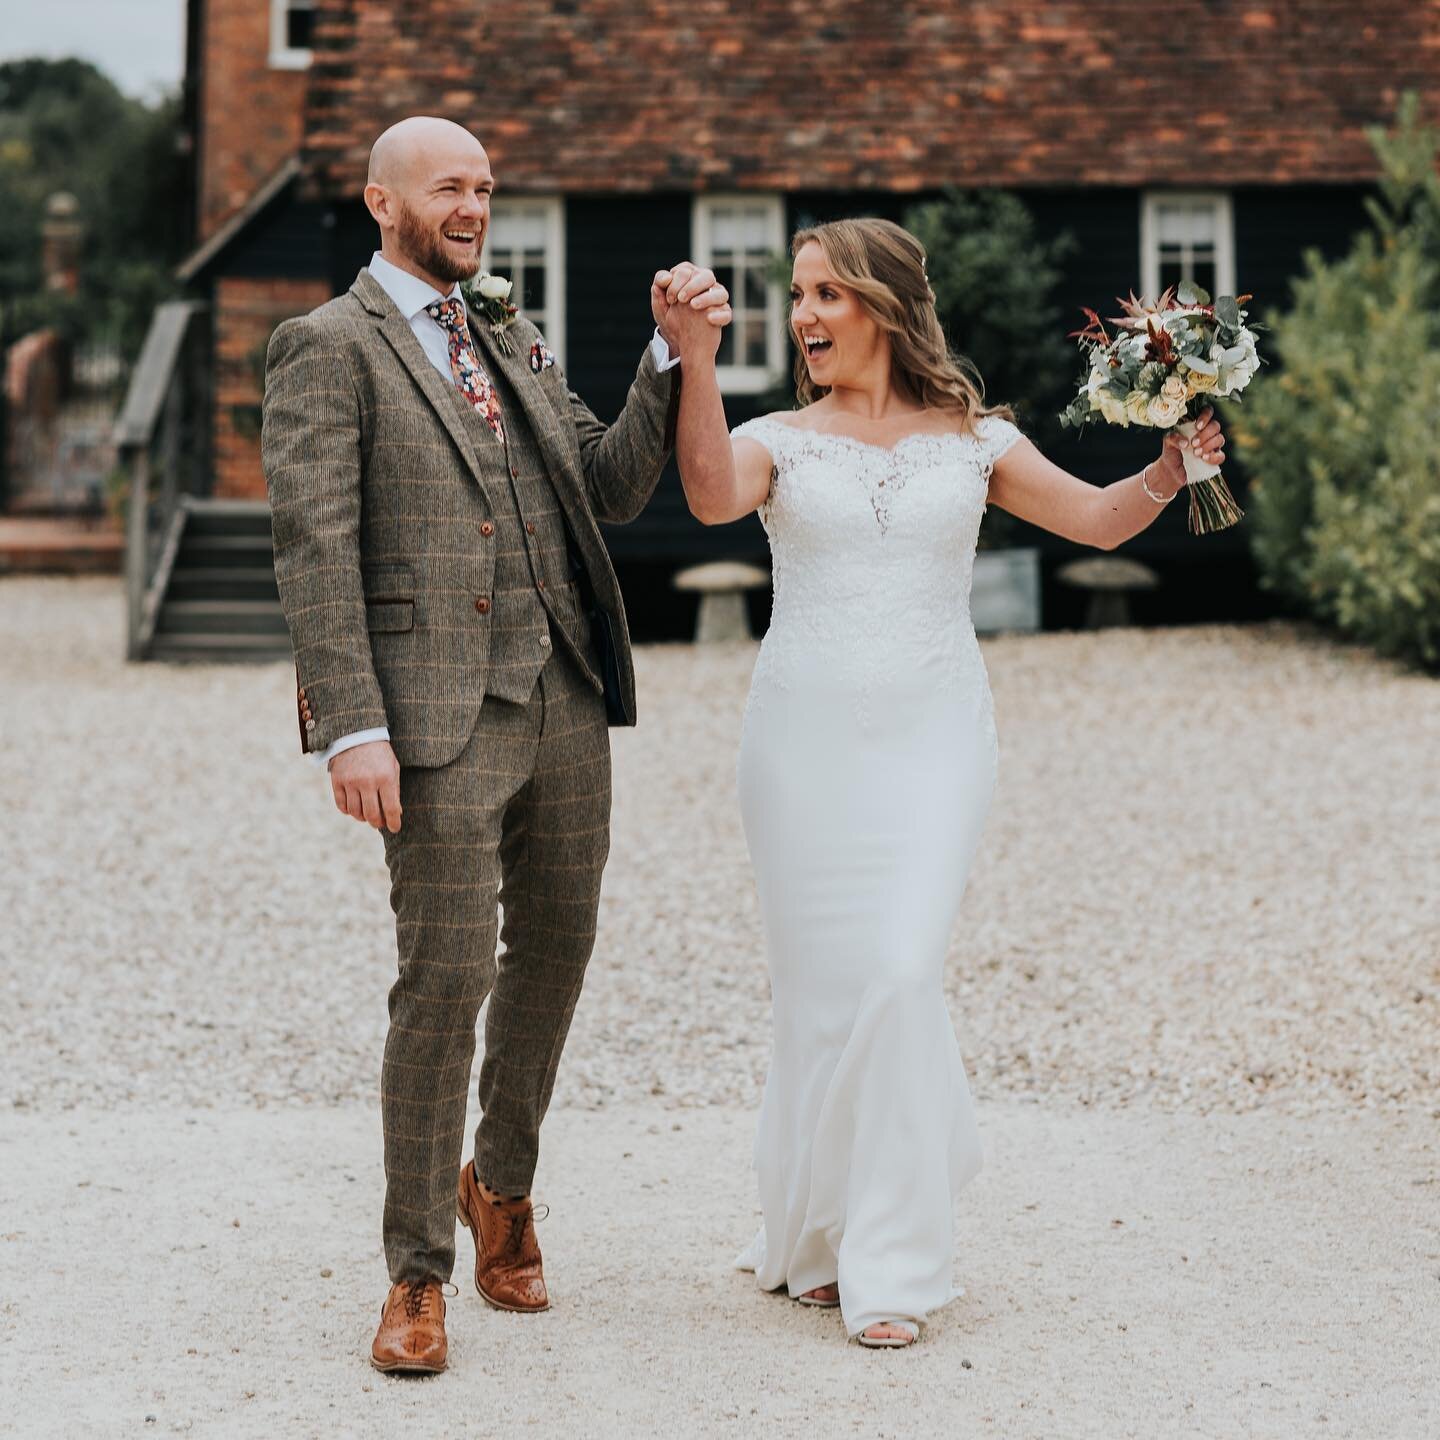 Congratulations L&amp;J!! What an incredible day!! Not even the autumn rain could dampen their spirits!! Was amazing working with such an awesome team huge shout out to my second shooter @katherine_and_her_camera  MUA: @alishamaymakeuphampshire hair 